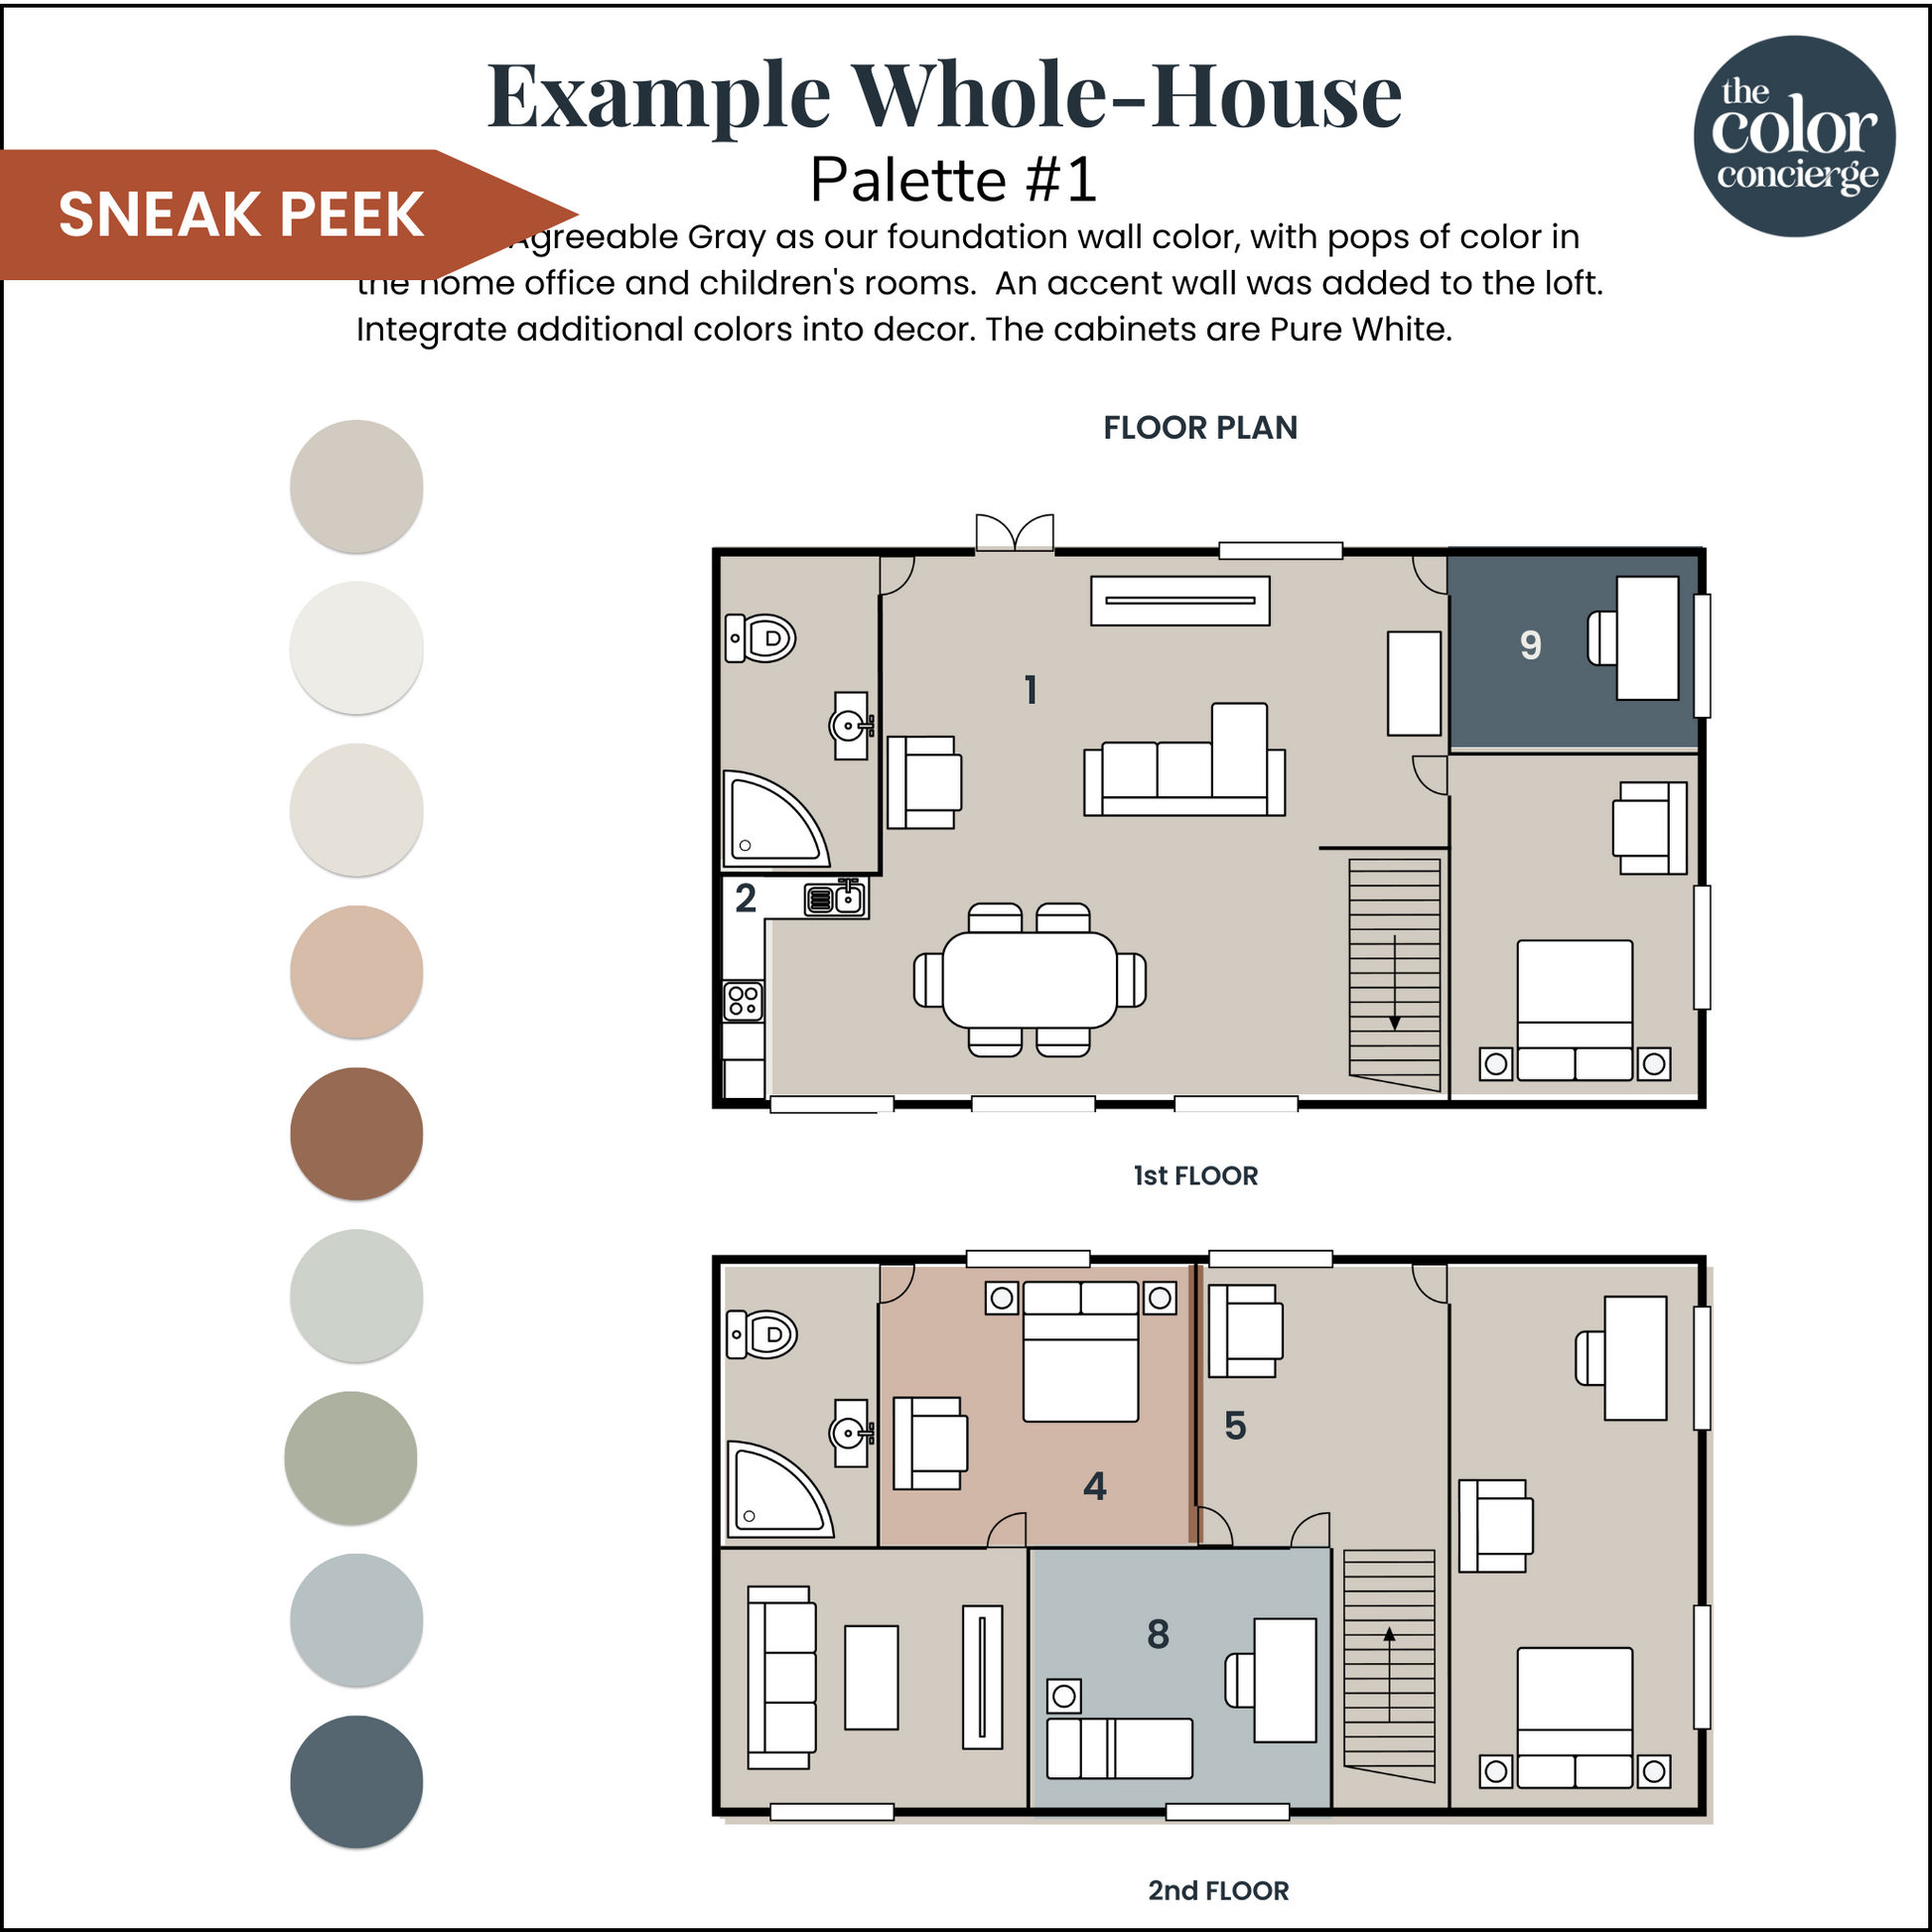 Sherwin-Williams Agreeable Gray whole-house color palette example